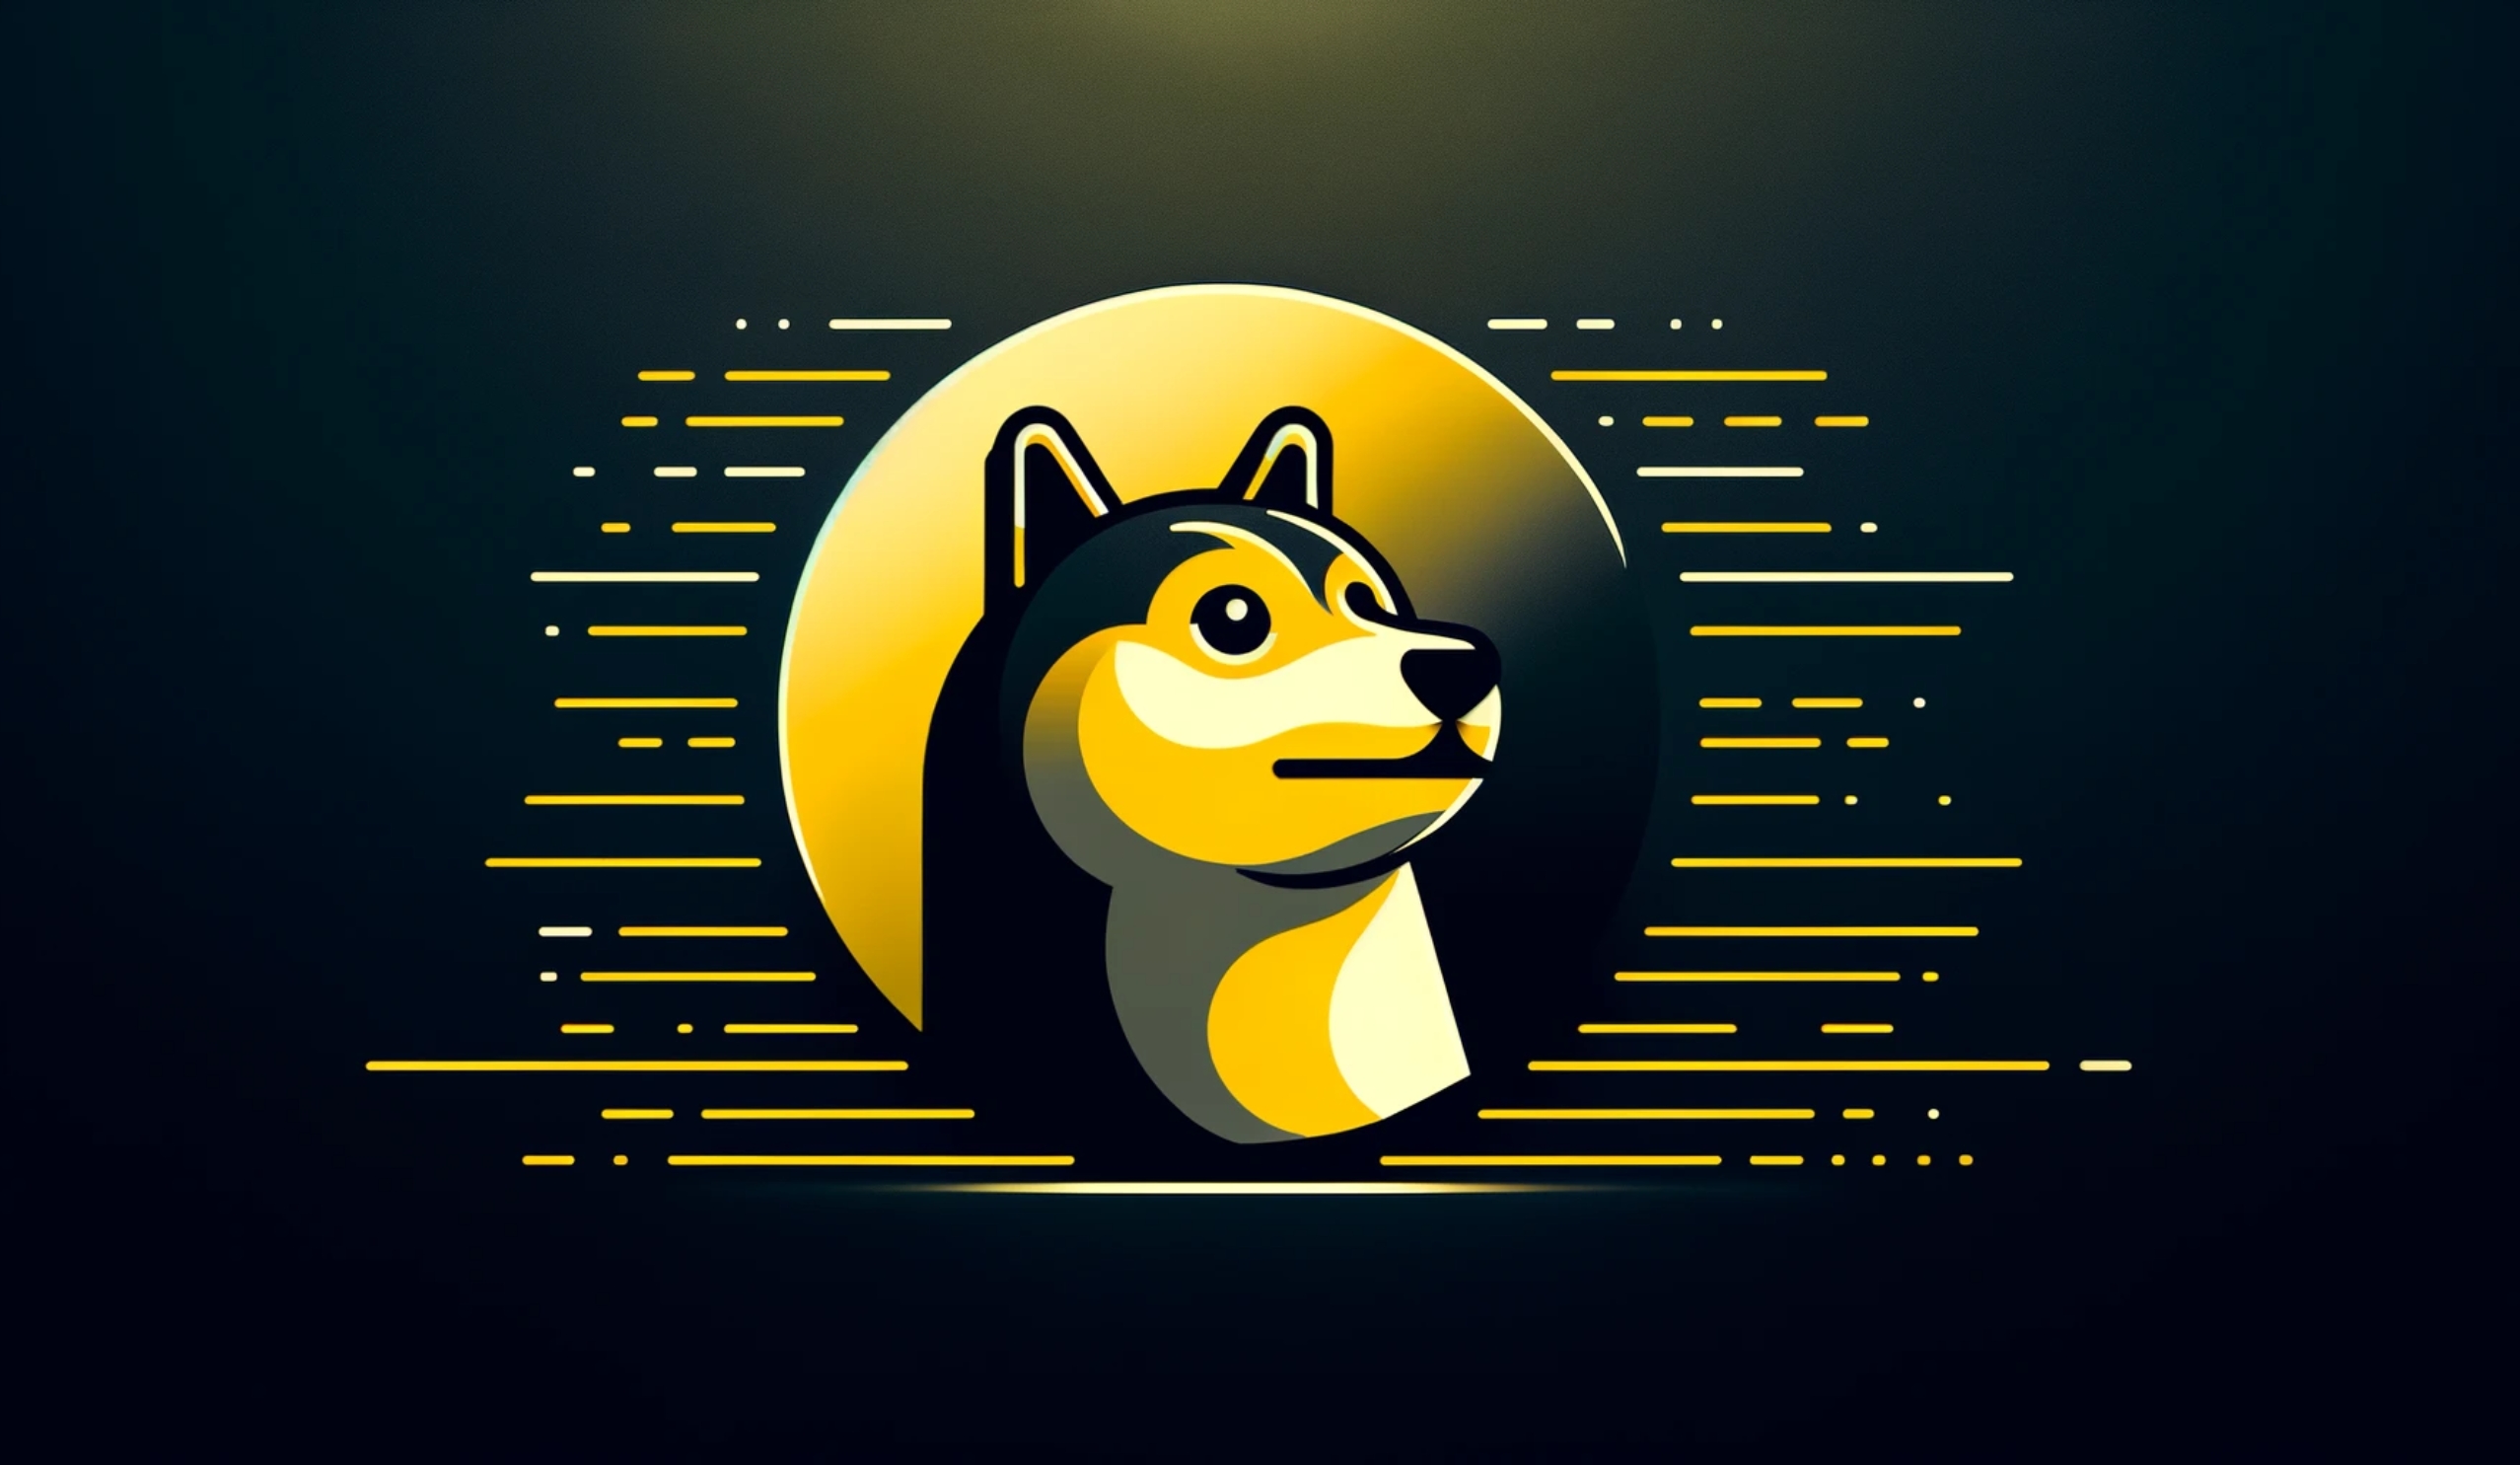 Understanding the Appeal of Dogecoin More Than Just a Meme Coin